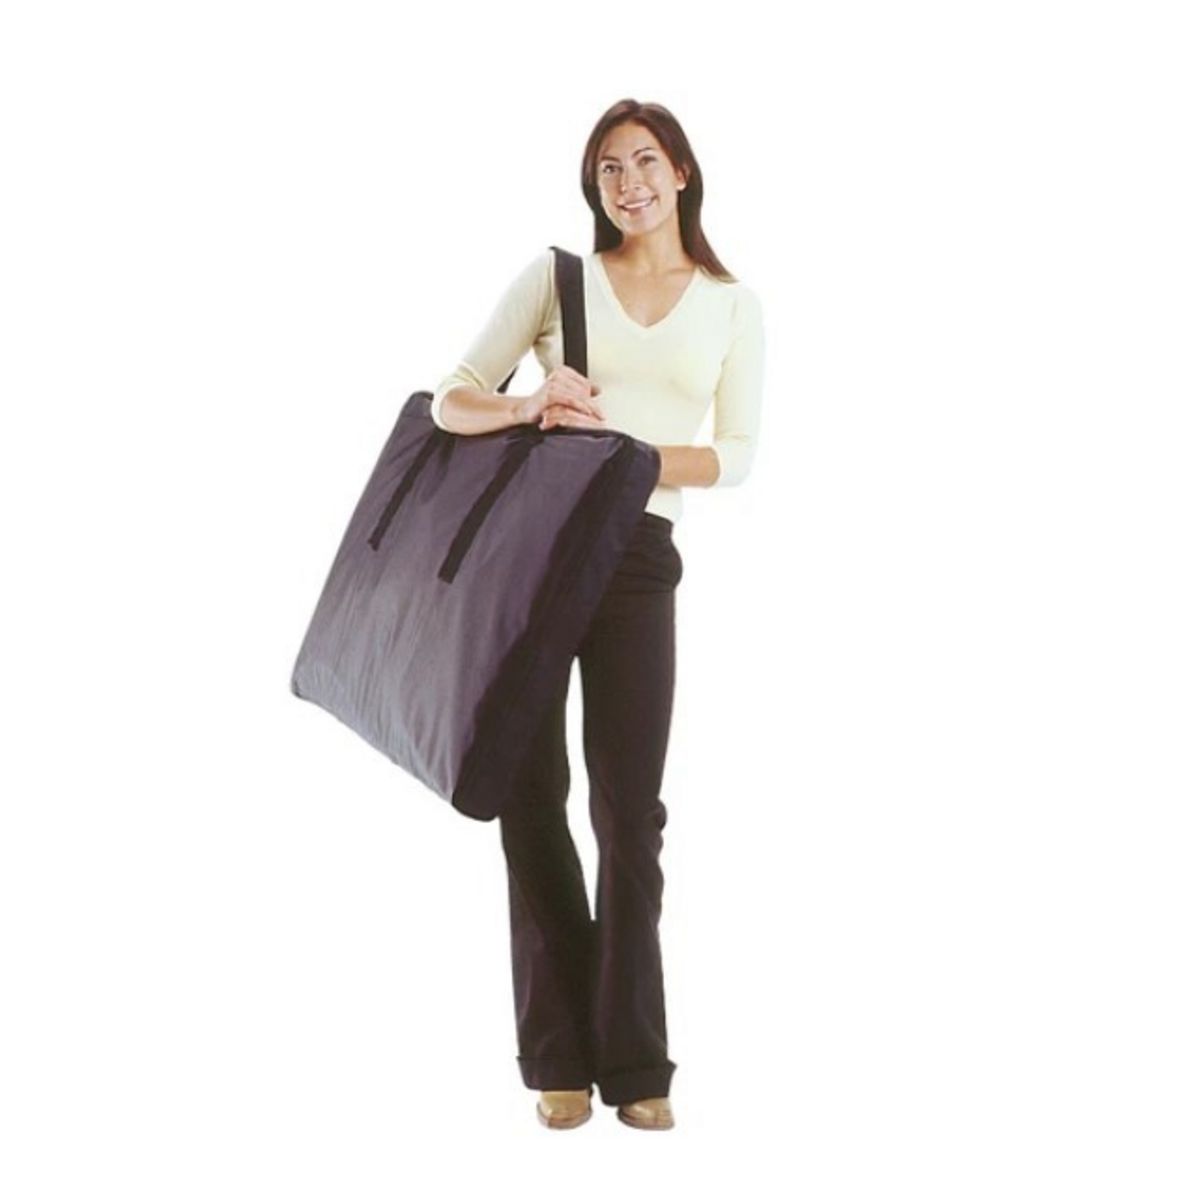 Lady holding carry bag including the Maxi 900 promotional display counter parts.jpg